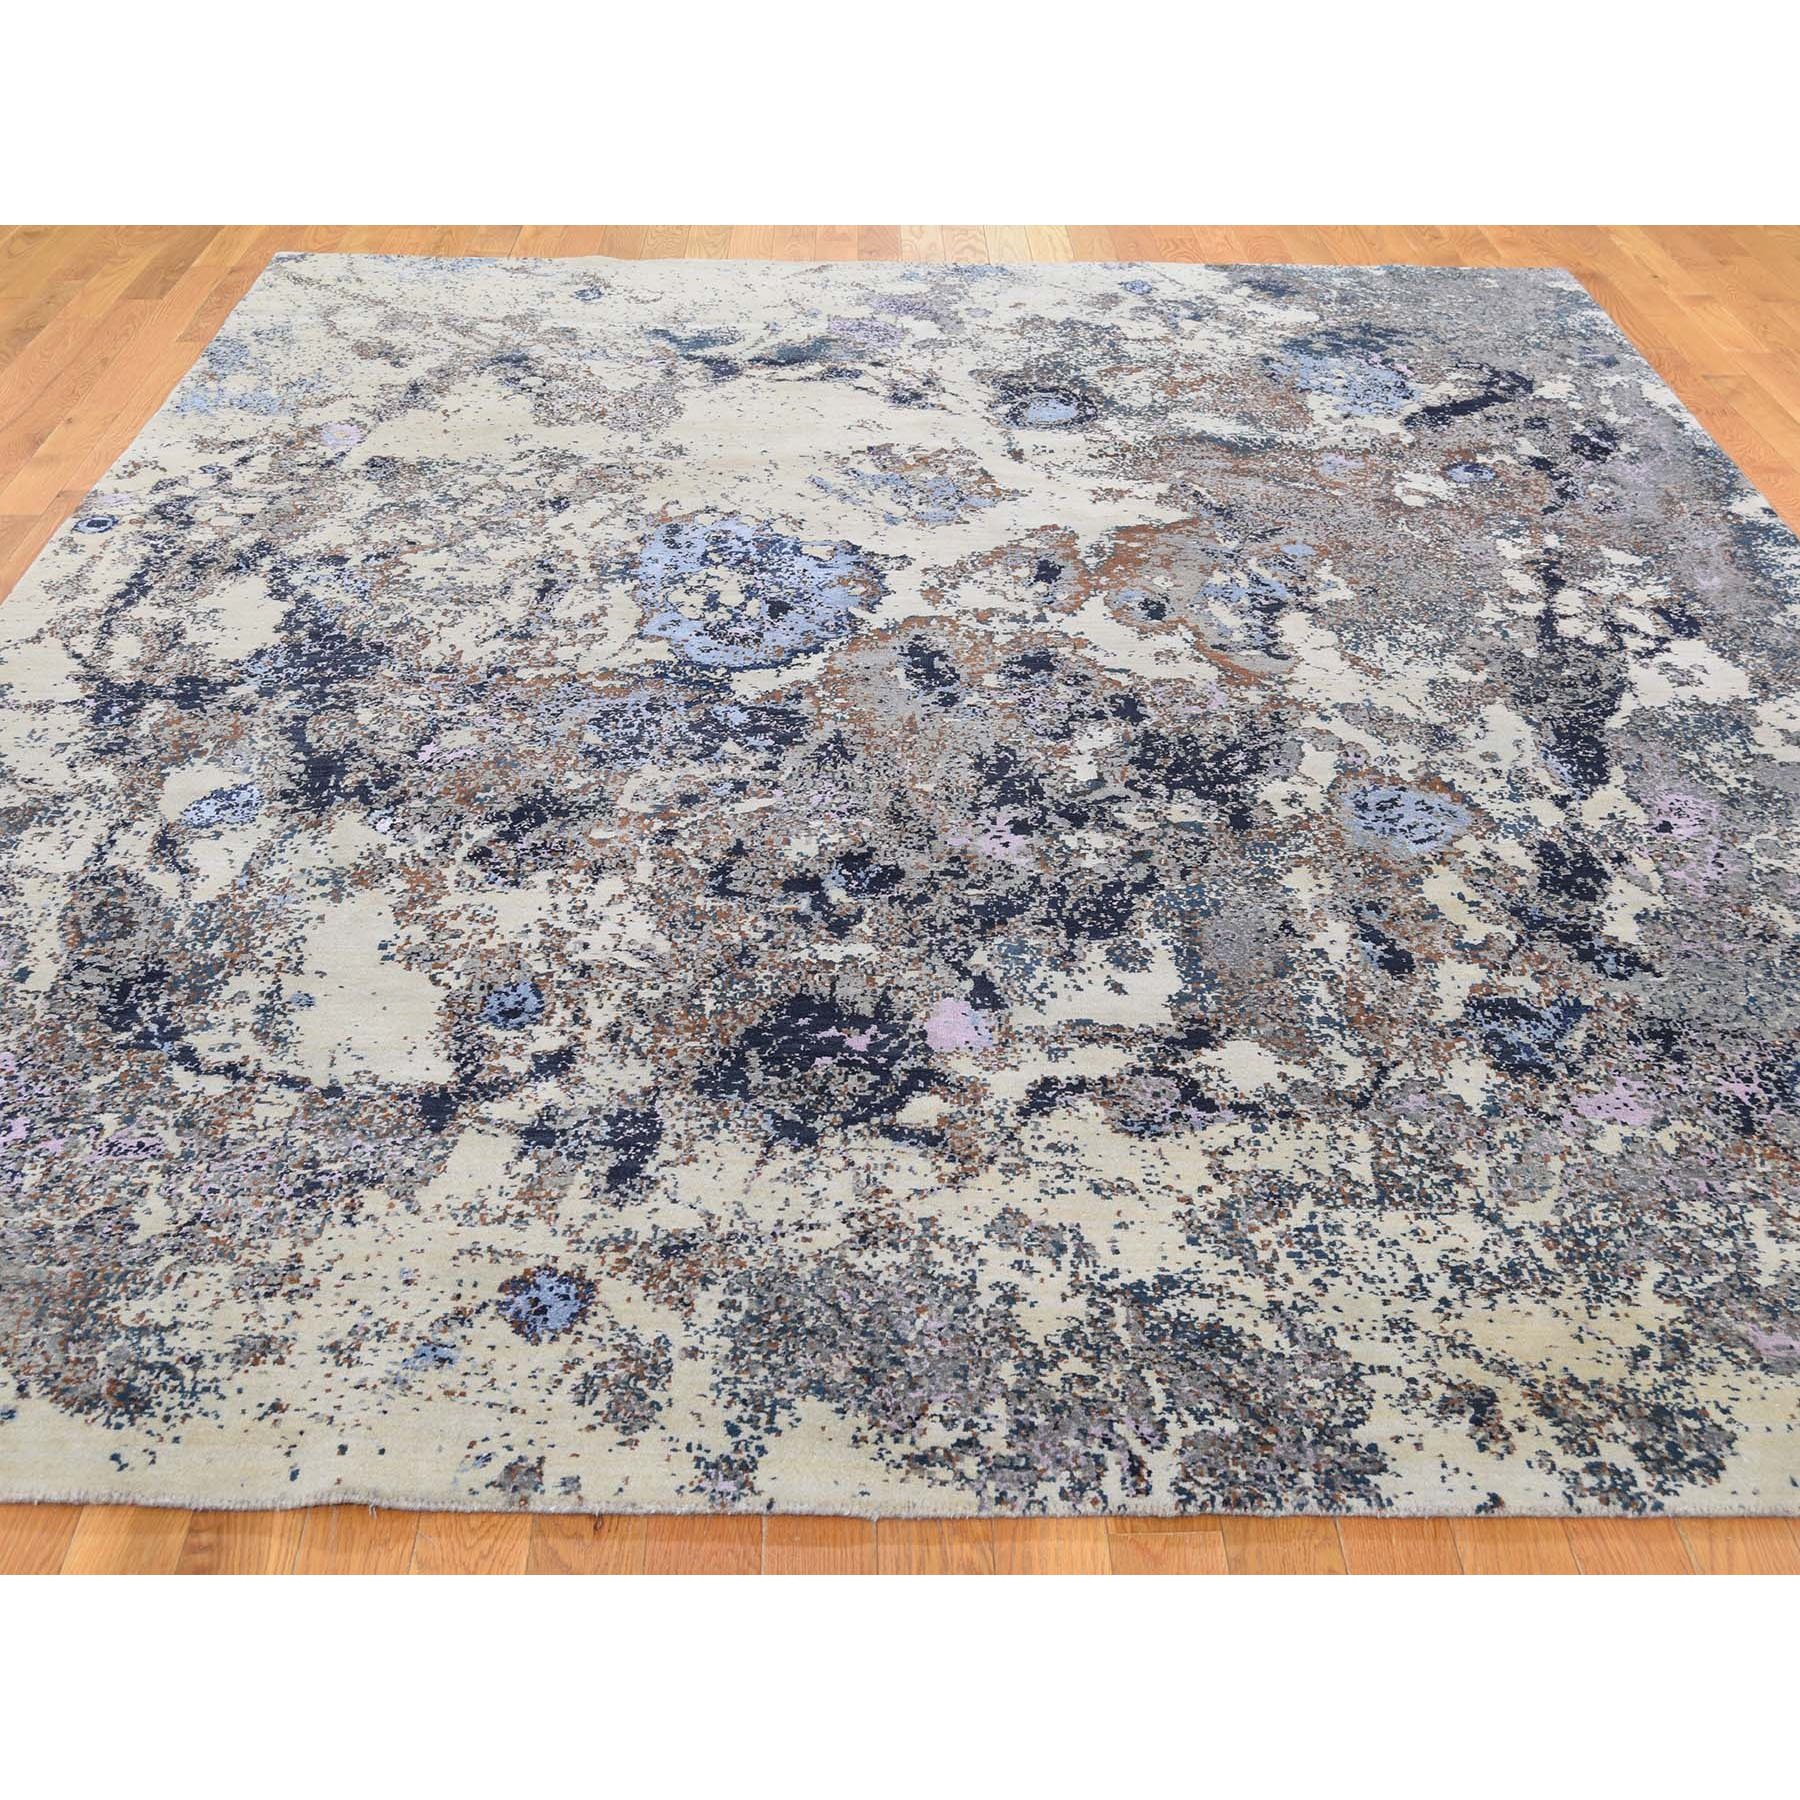 8-x10- Abstract Design Wool and Silk Hand-Knotted Oriental Rug 